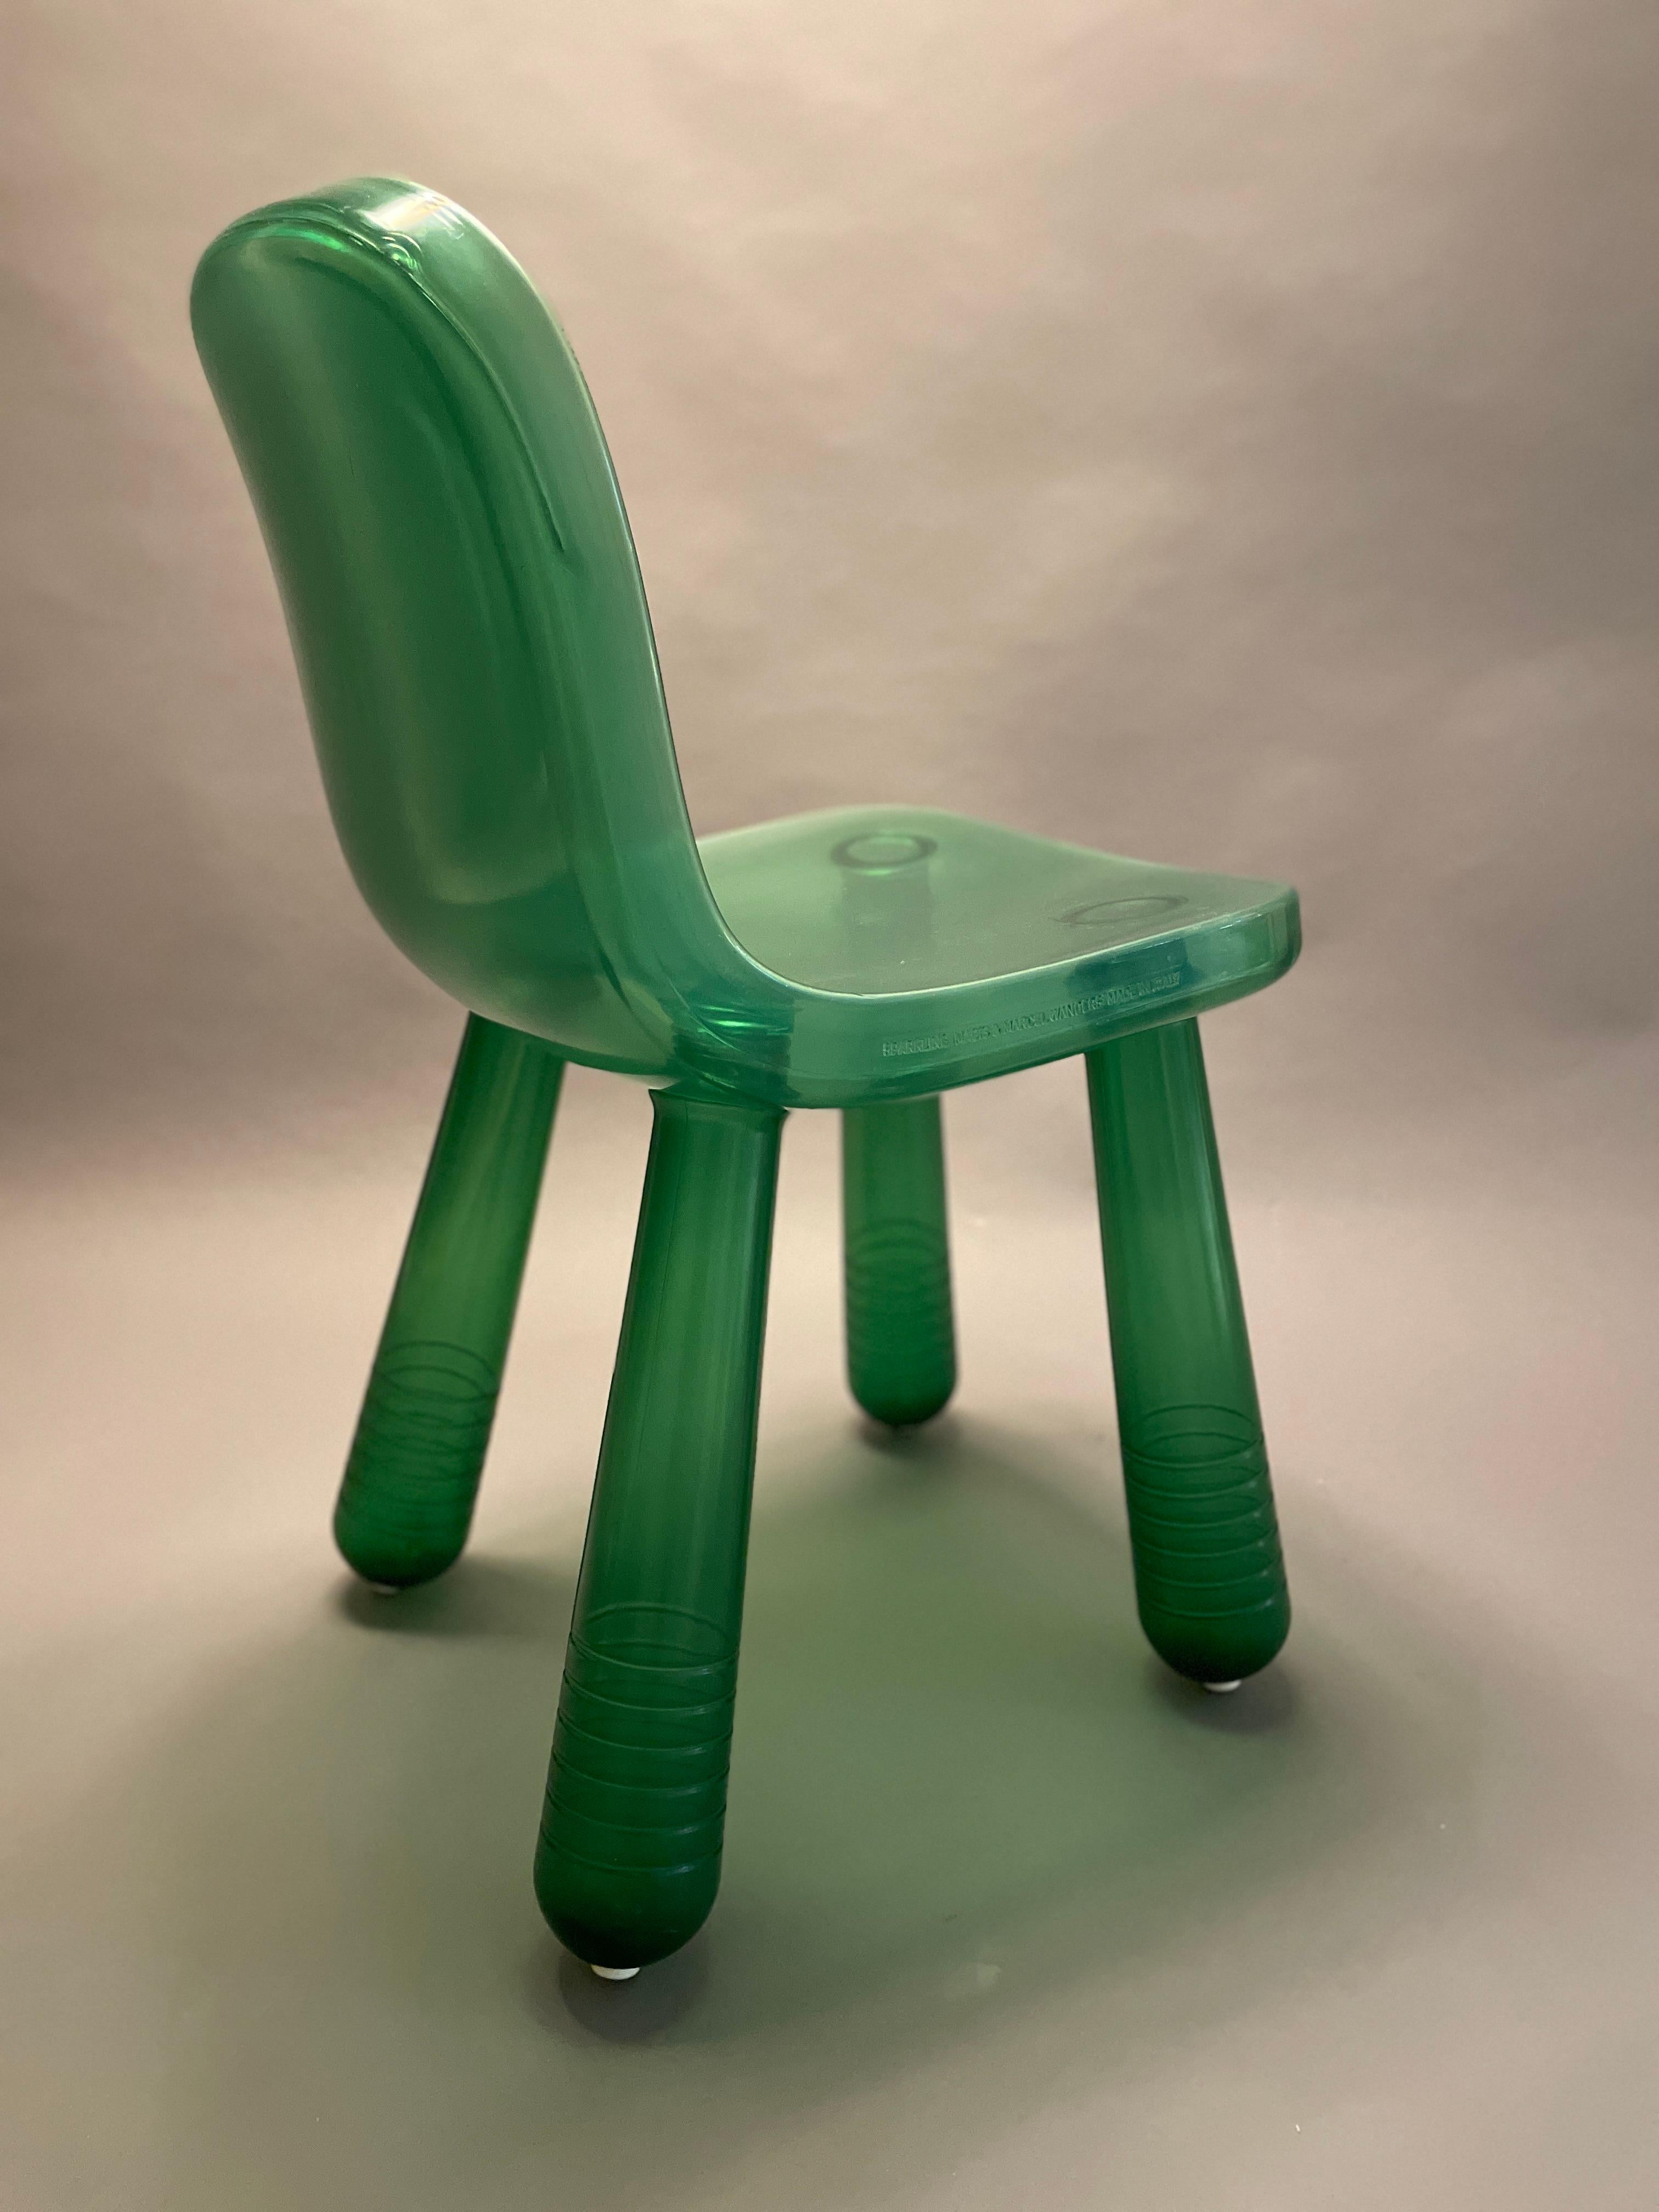 With the blowing of air into the Sparkling Chair (2010), strength and sturdiness is breathed into the chair. Made out of PET and produced using the same blow moulding technique commonly used in the manufacturing of water bottles, the hollow spaces